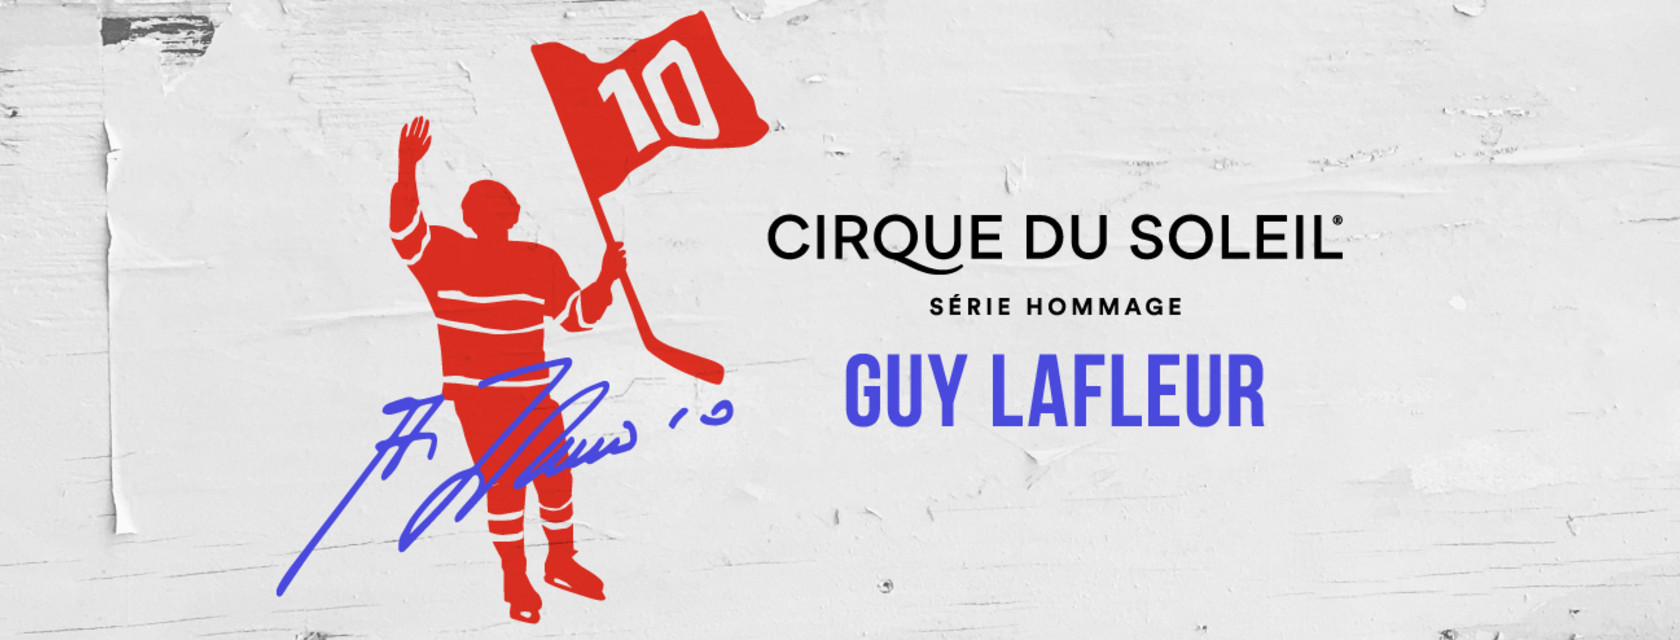 The seventh creation in Cirque du Soleil's Tribute Series will honor field hockey legend Guy Lafleur!